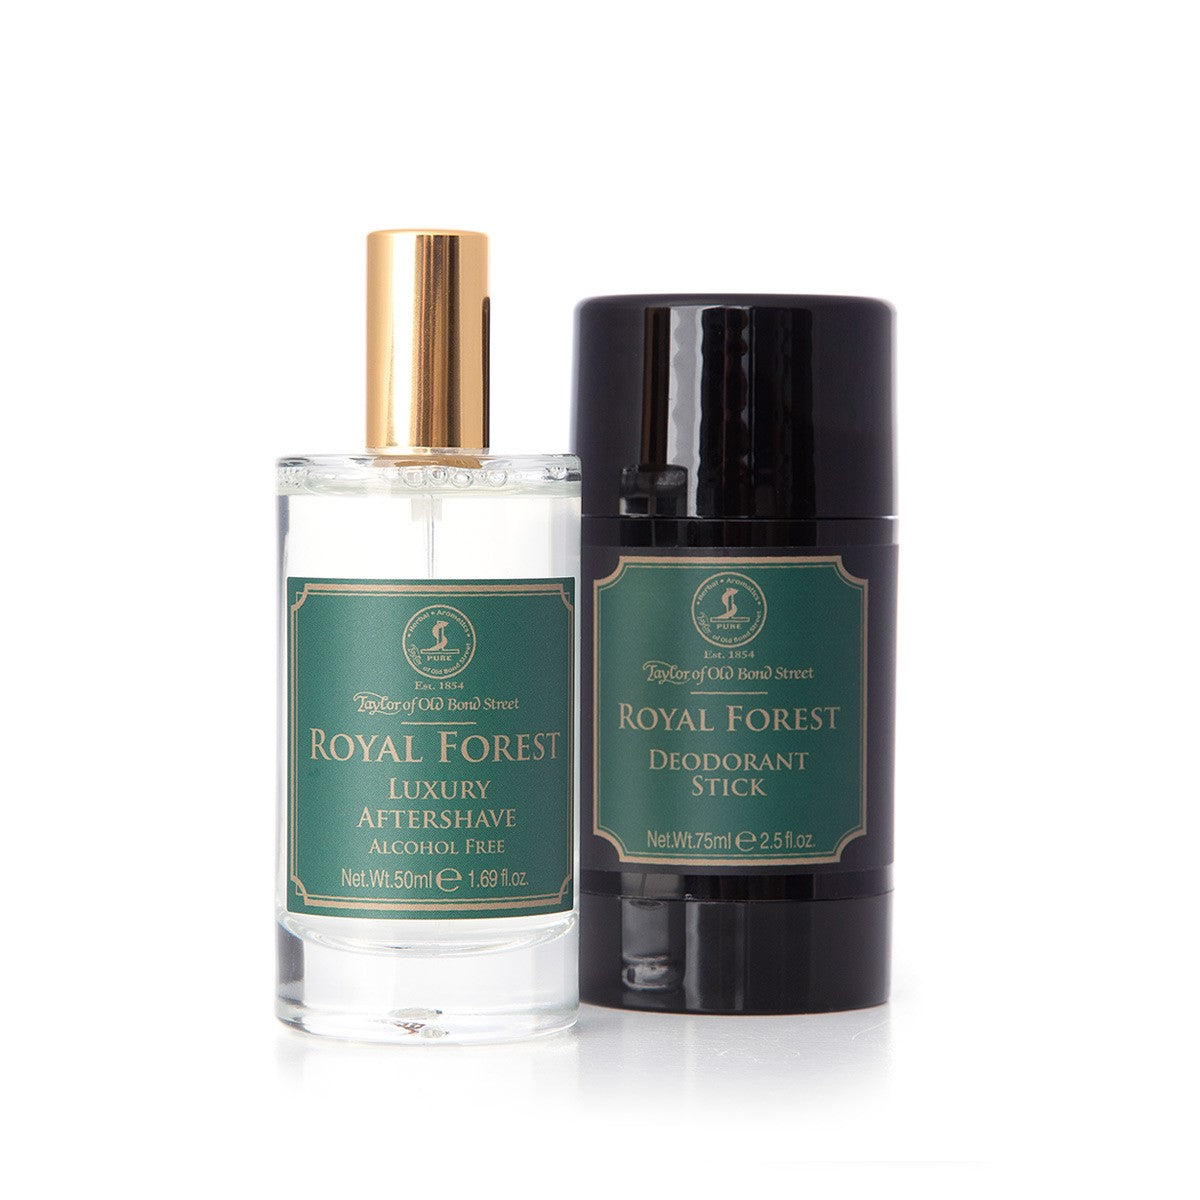 Royal Forest Aftershave and Deodorant Gift Taylor - of Bond Set Old Street